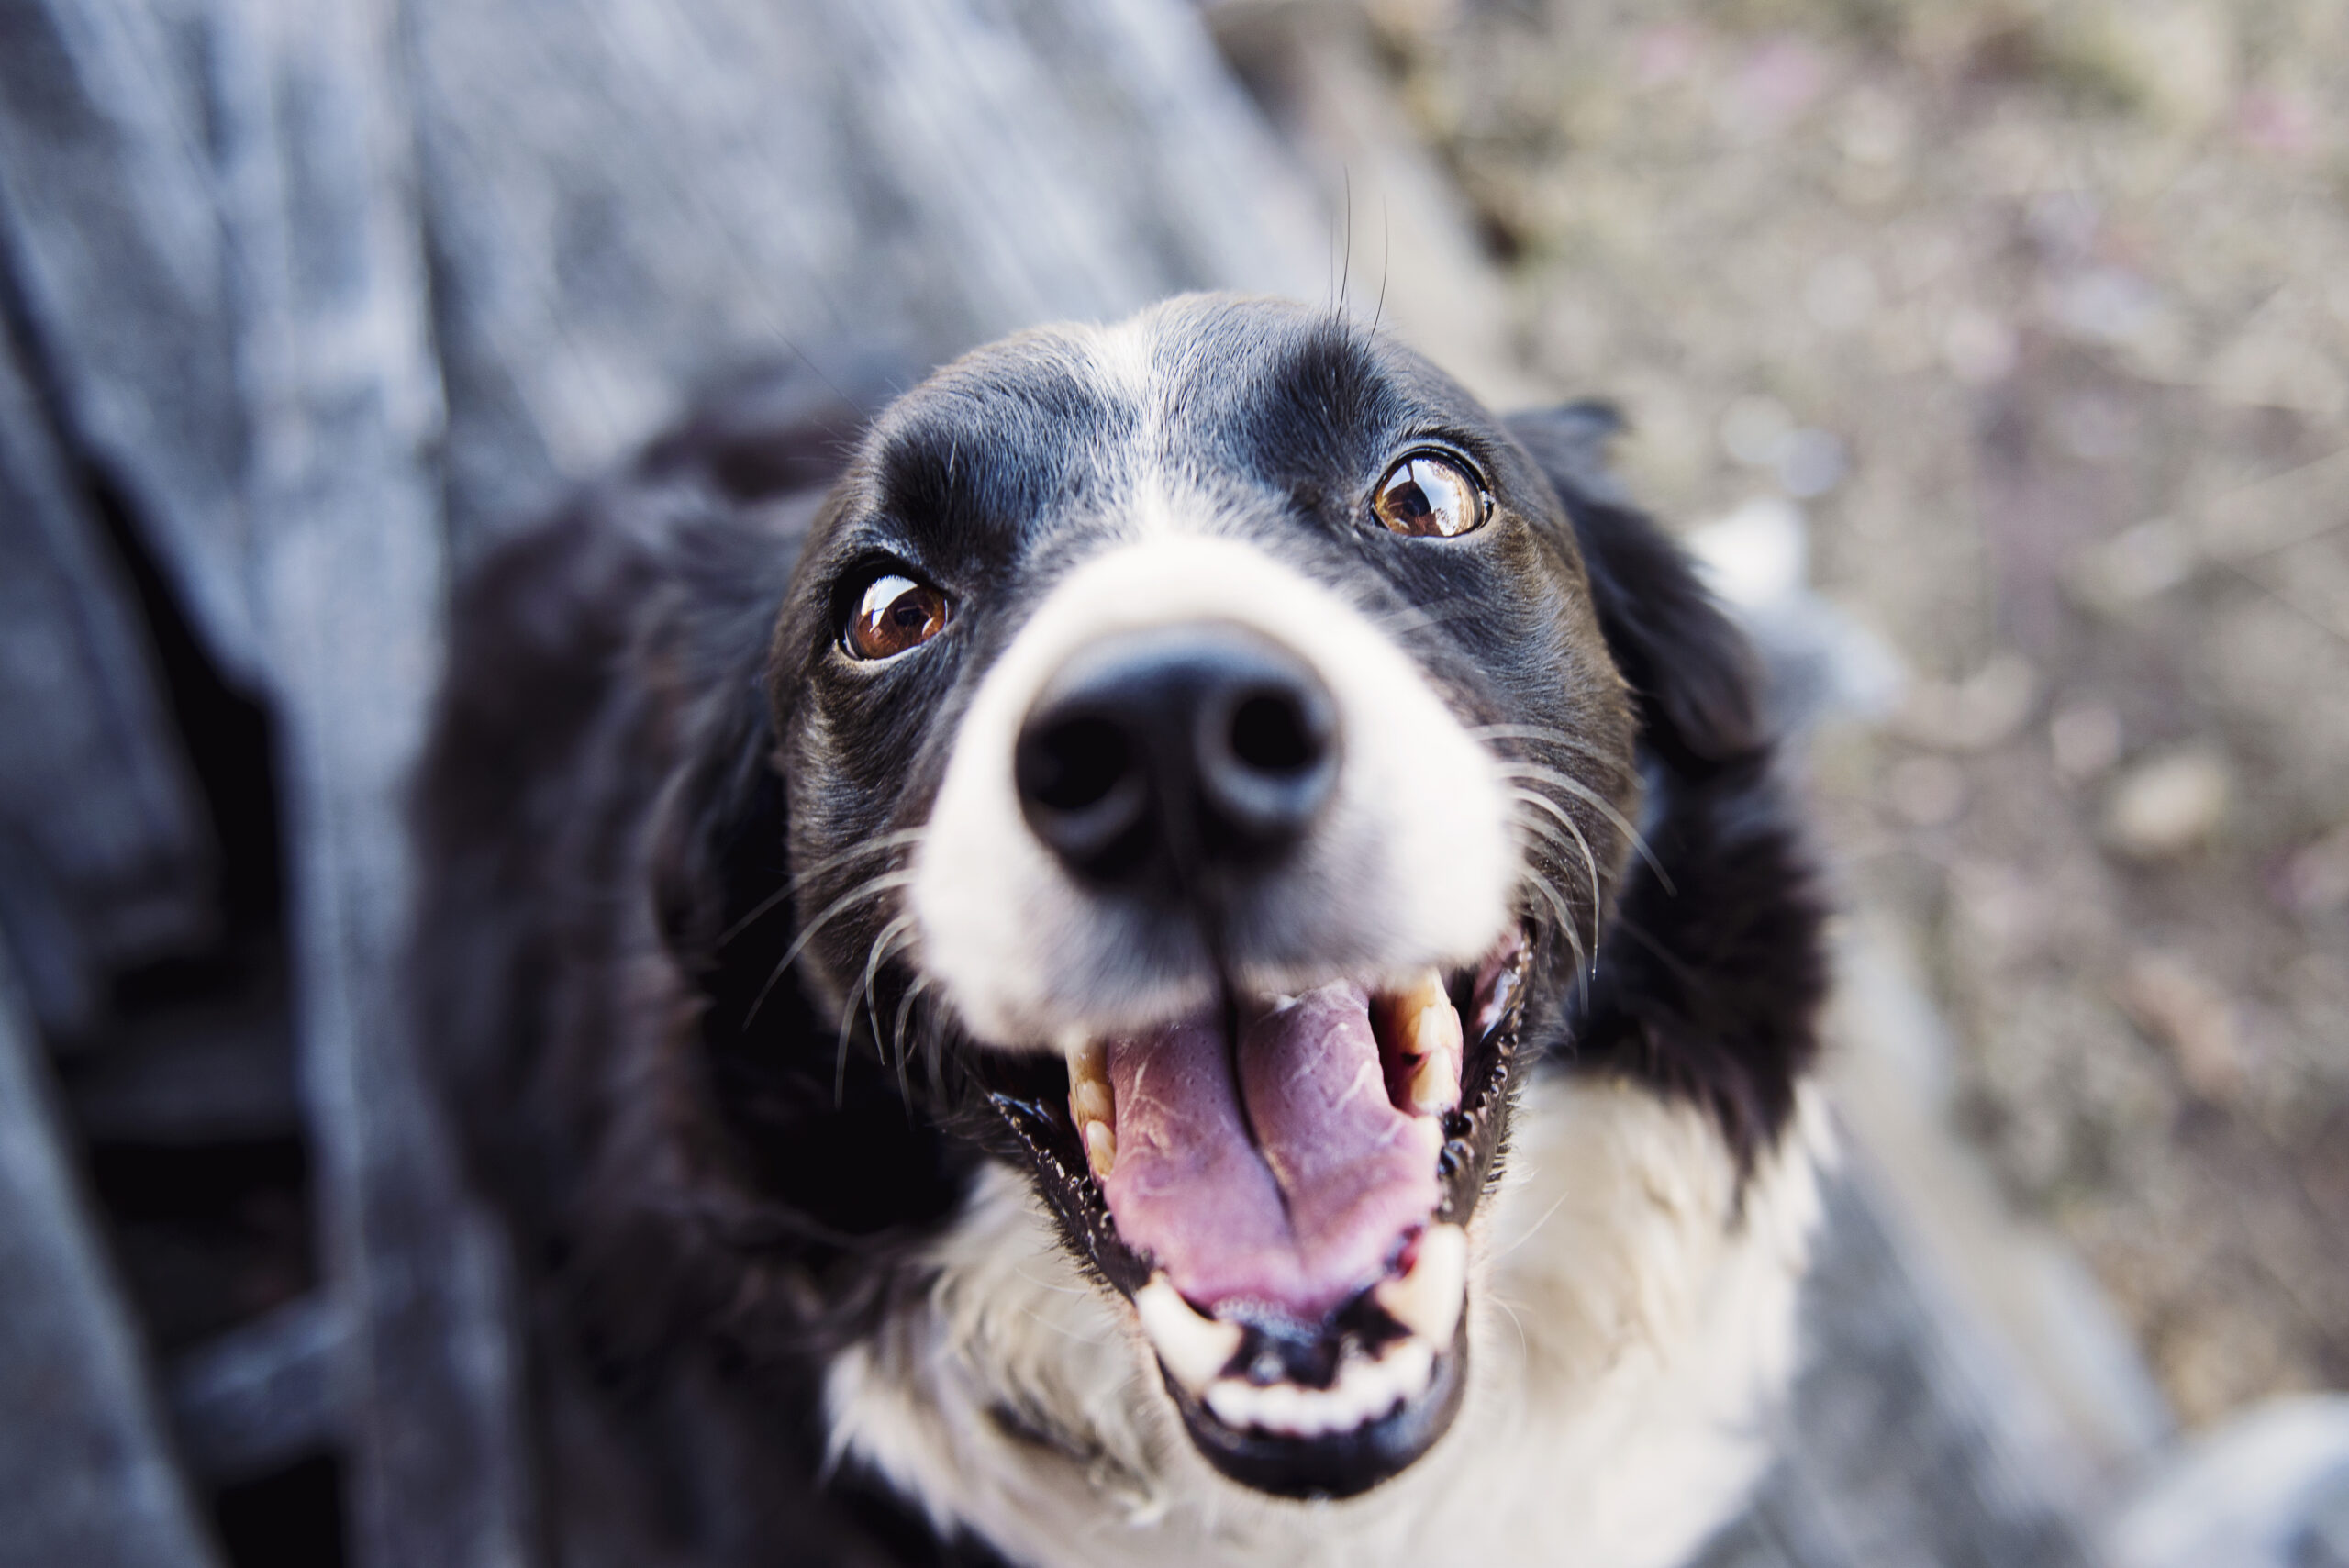 14 reasons a dog will improve your life quality